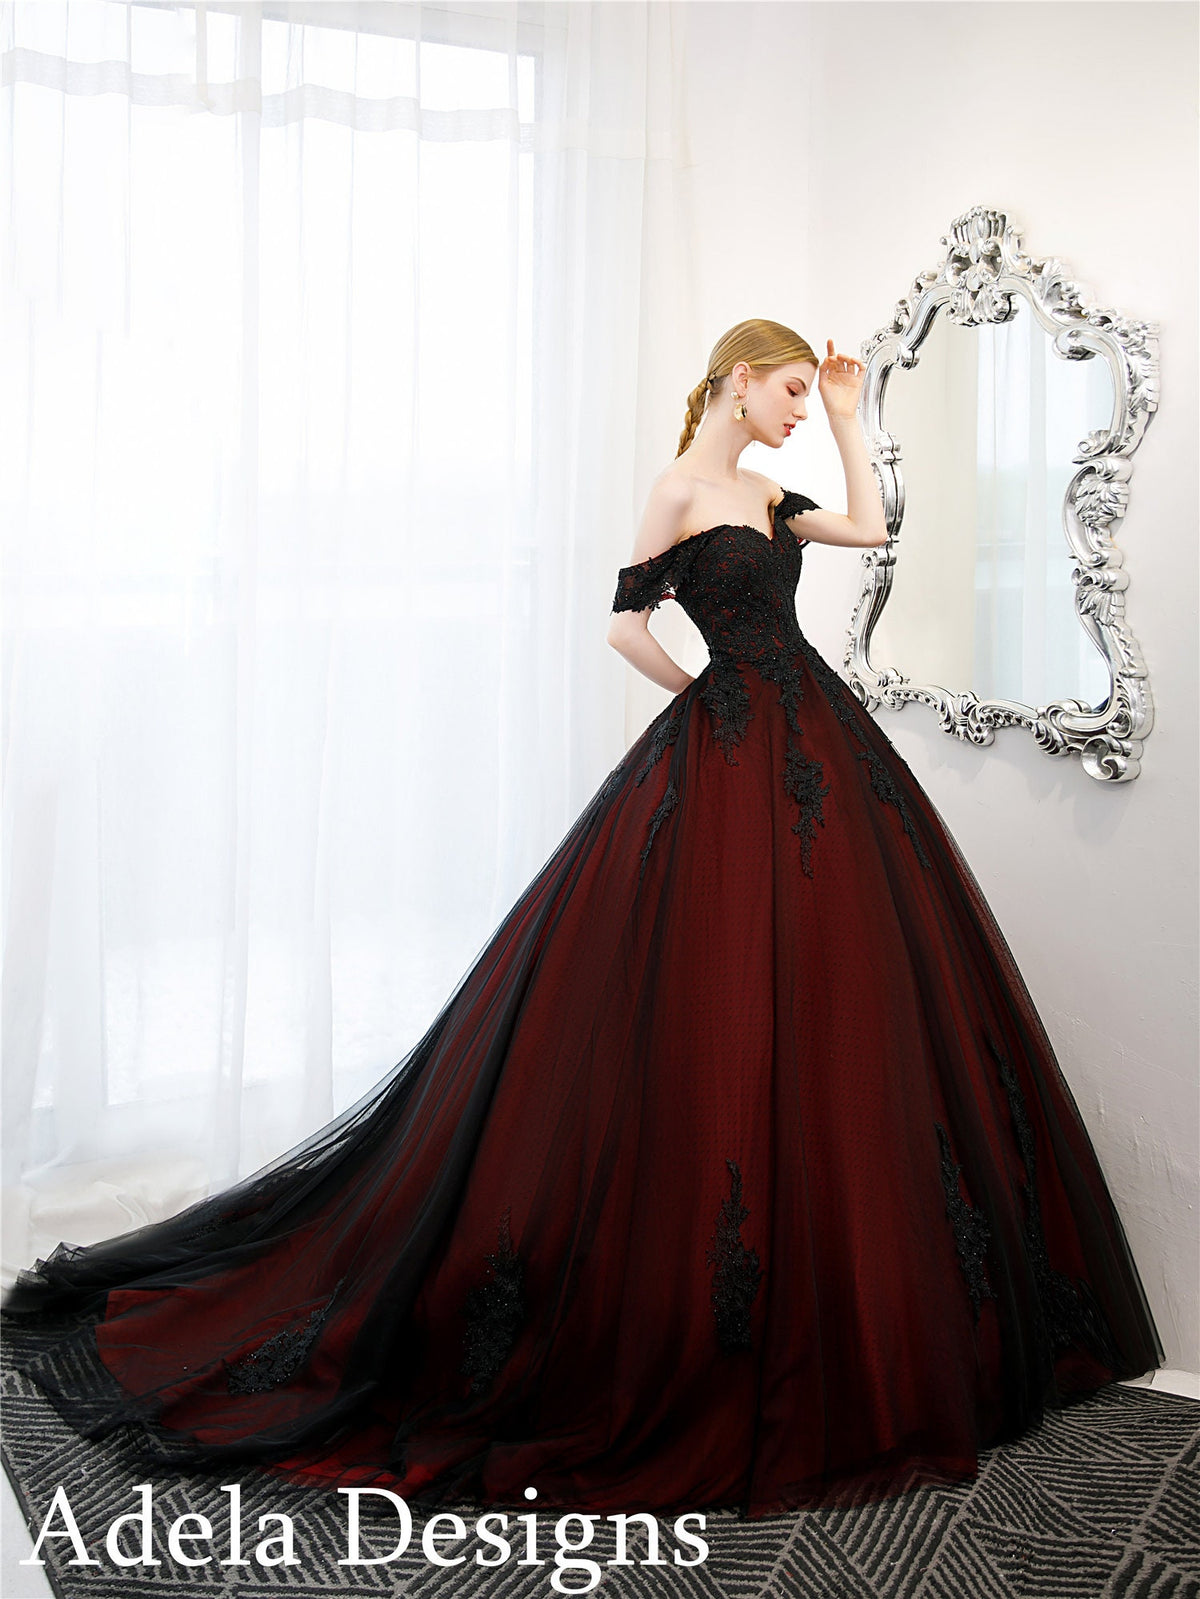 Black And Dark Red Ball Gown Gothic Wedding Dress Bridal Off The Shoulder Lace Bare Shoulders Open Back Ballgown